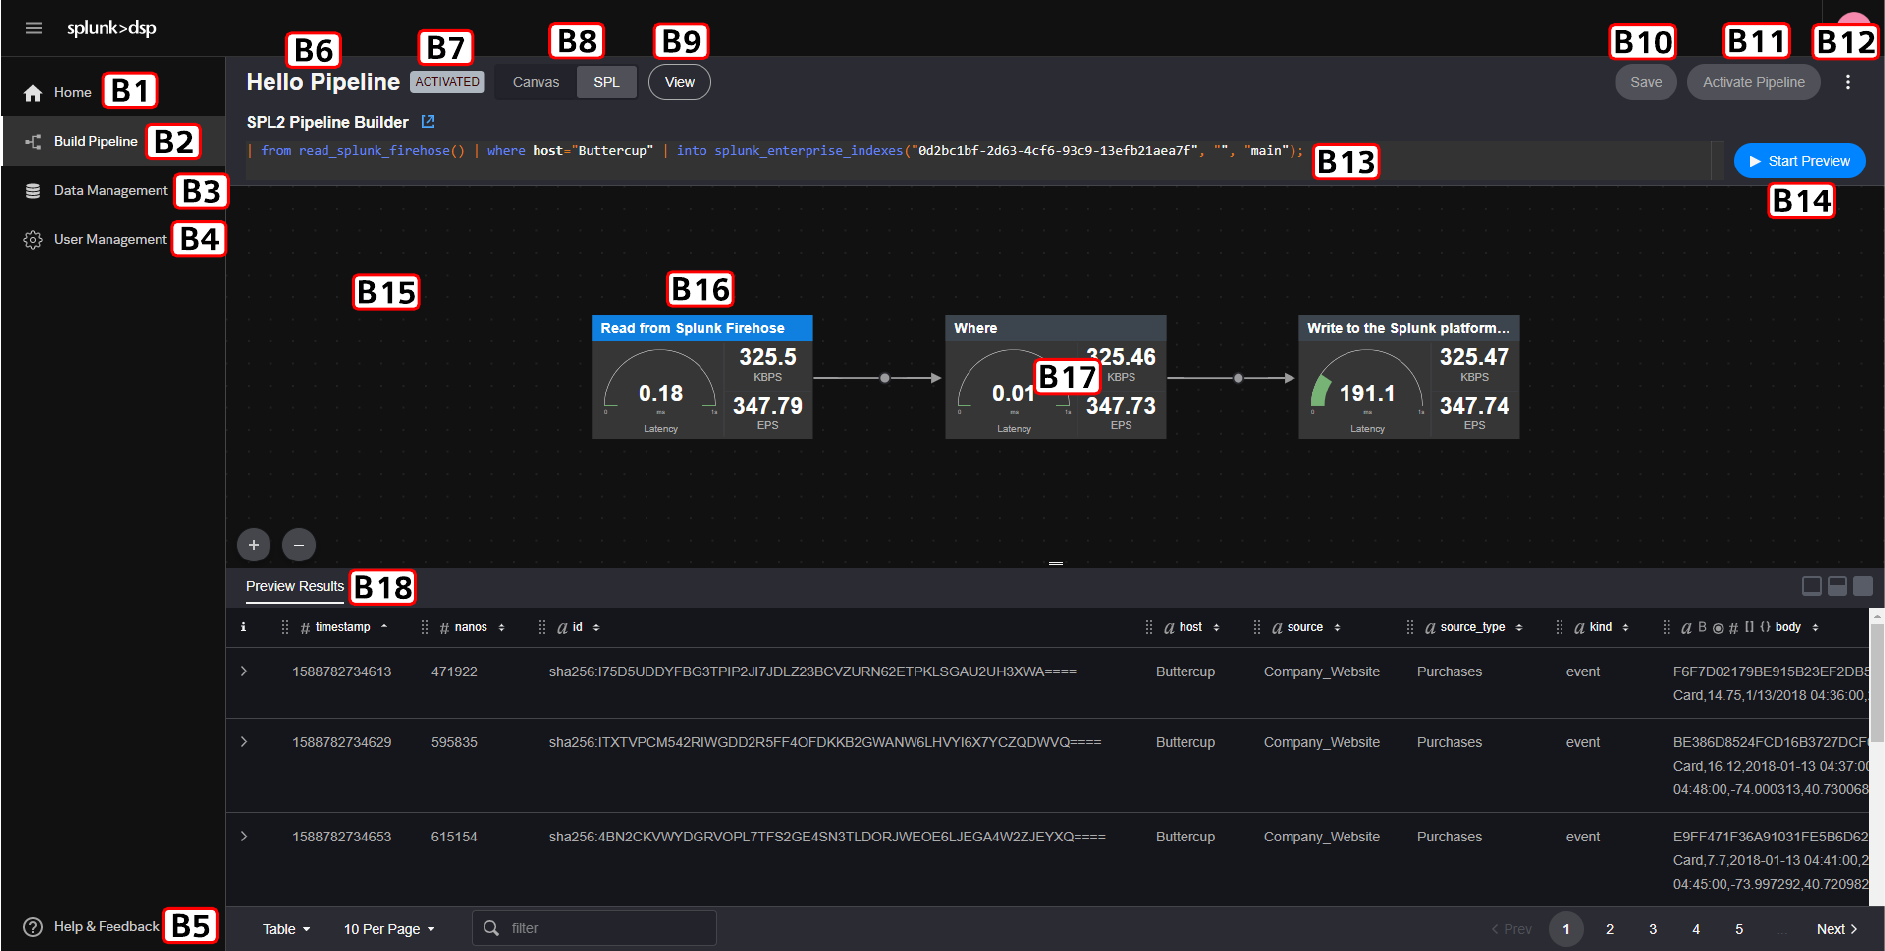 This screenshot shows the SPL2 Pipeline Builder in DSP. The Build Pipeline page is selected, and the Builder switch is set to SPL. Specific UI elements are labelled with letters and numbers.